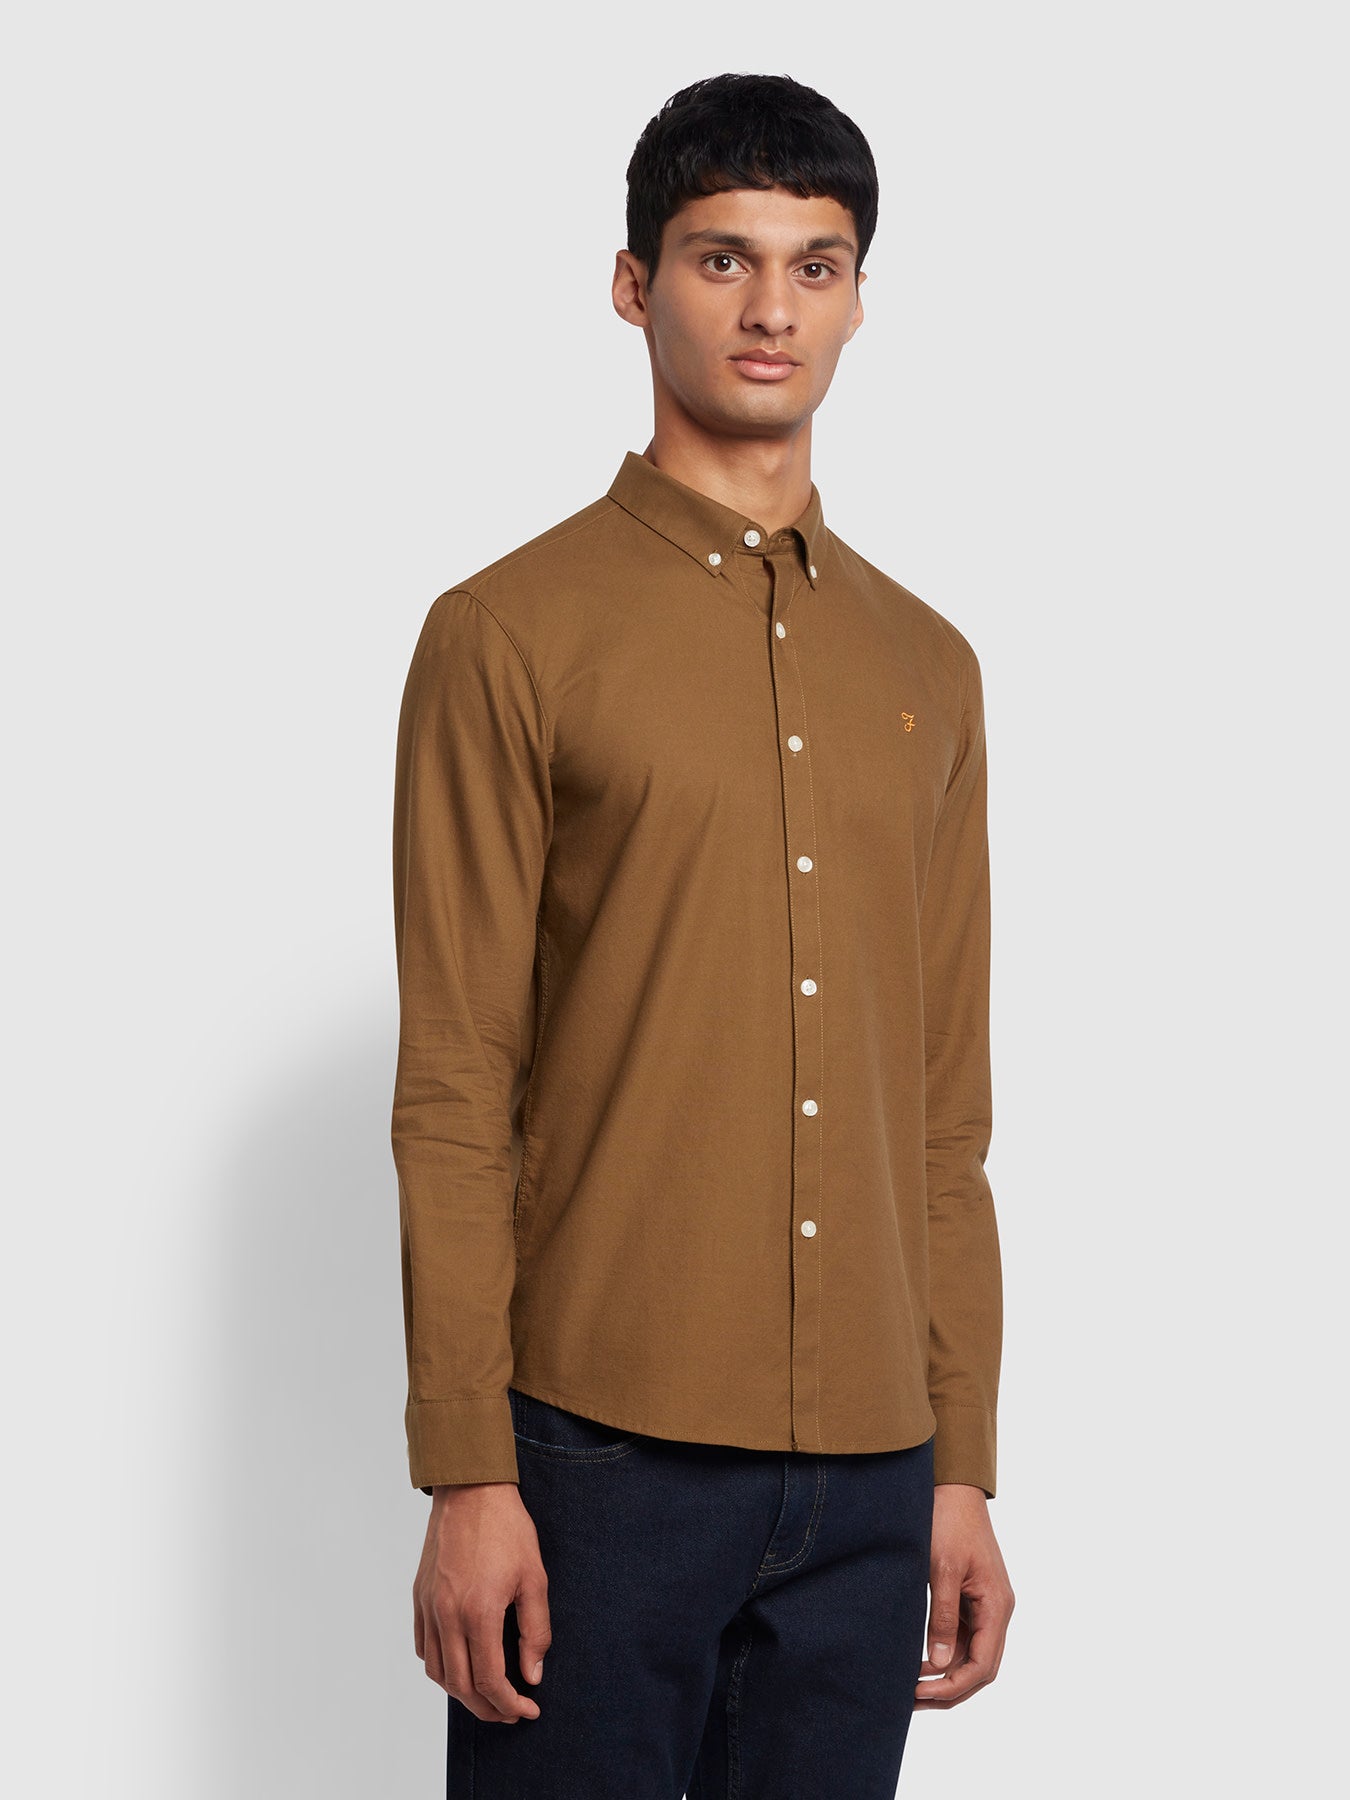 View Brewer Slim Fit Organic Cotton Oxford Shirt In Brown information